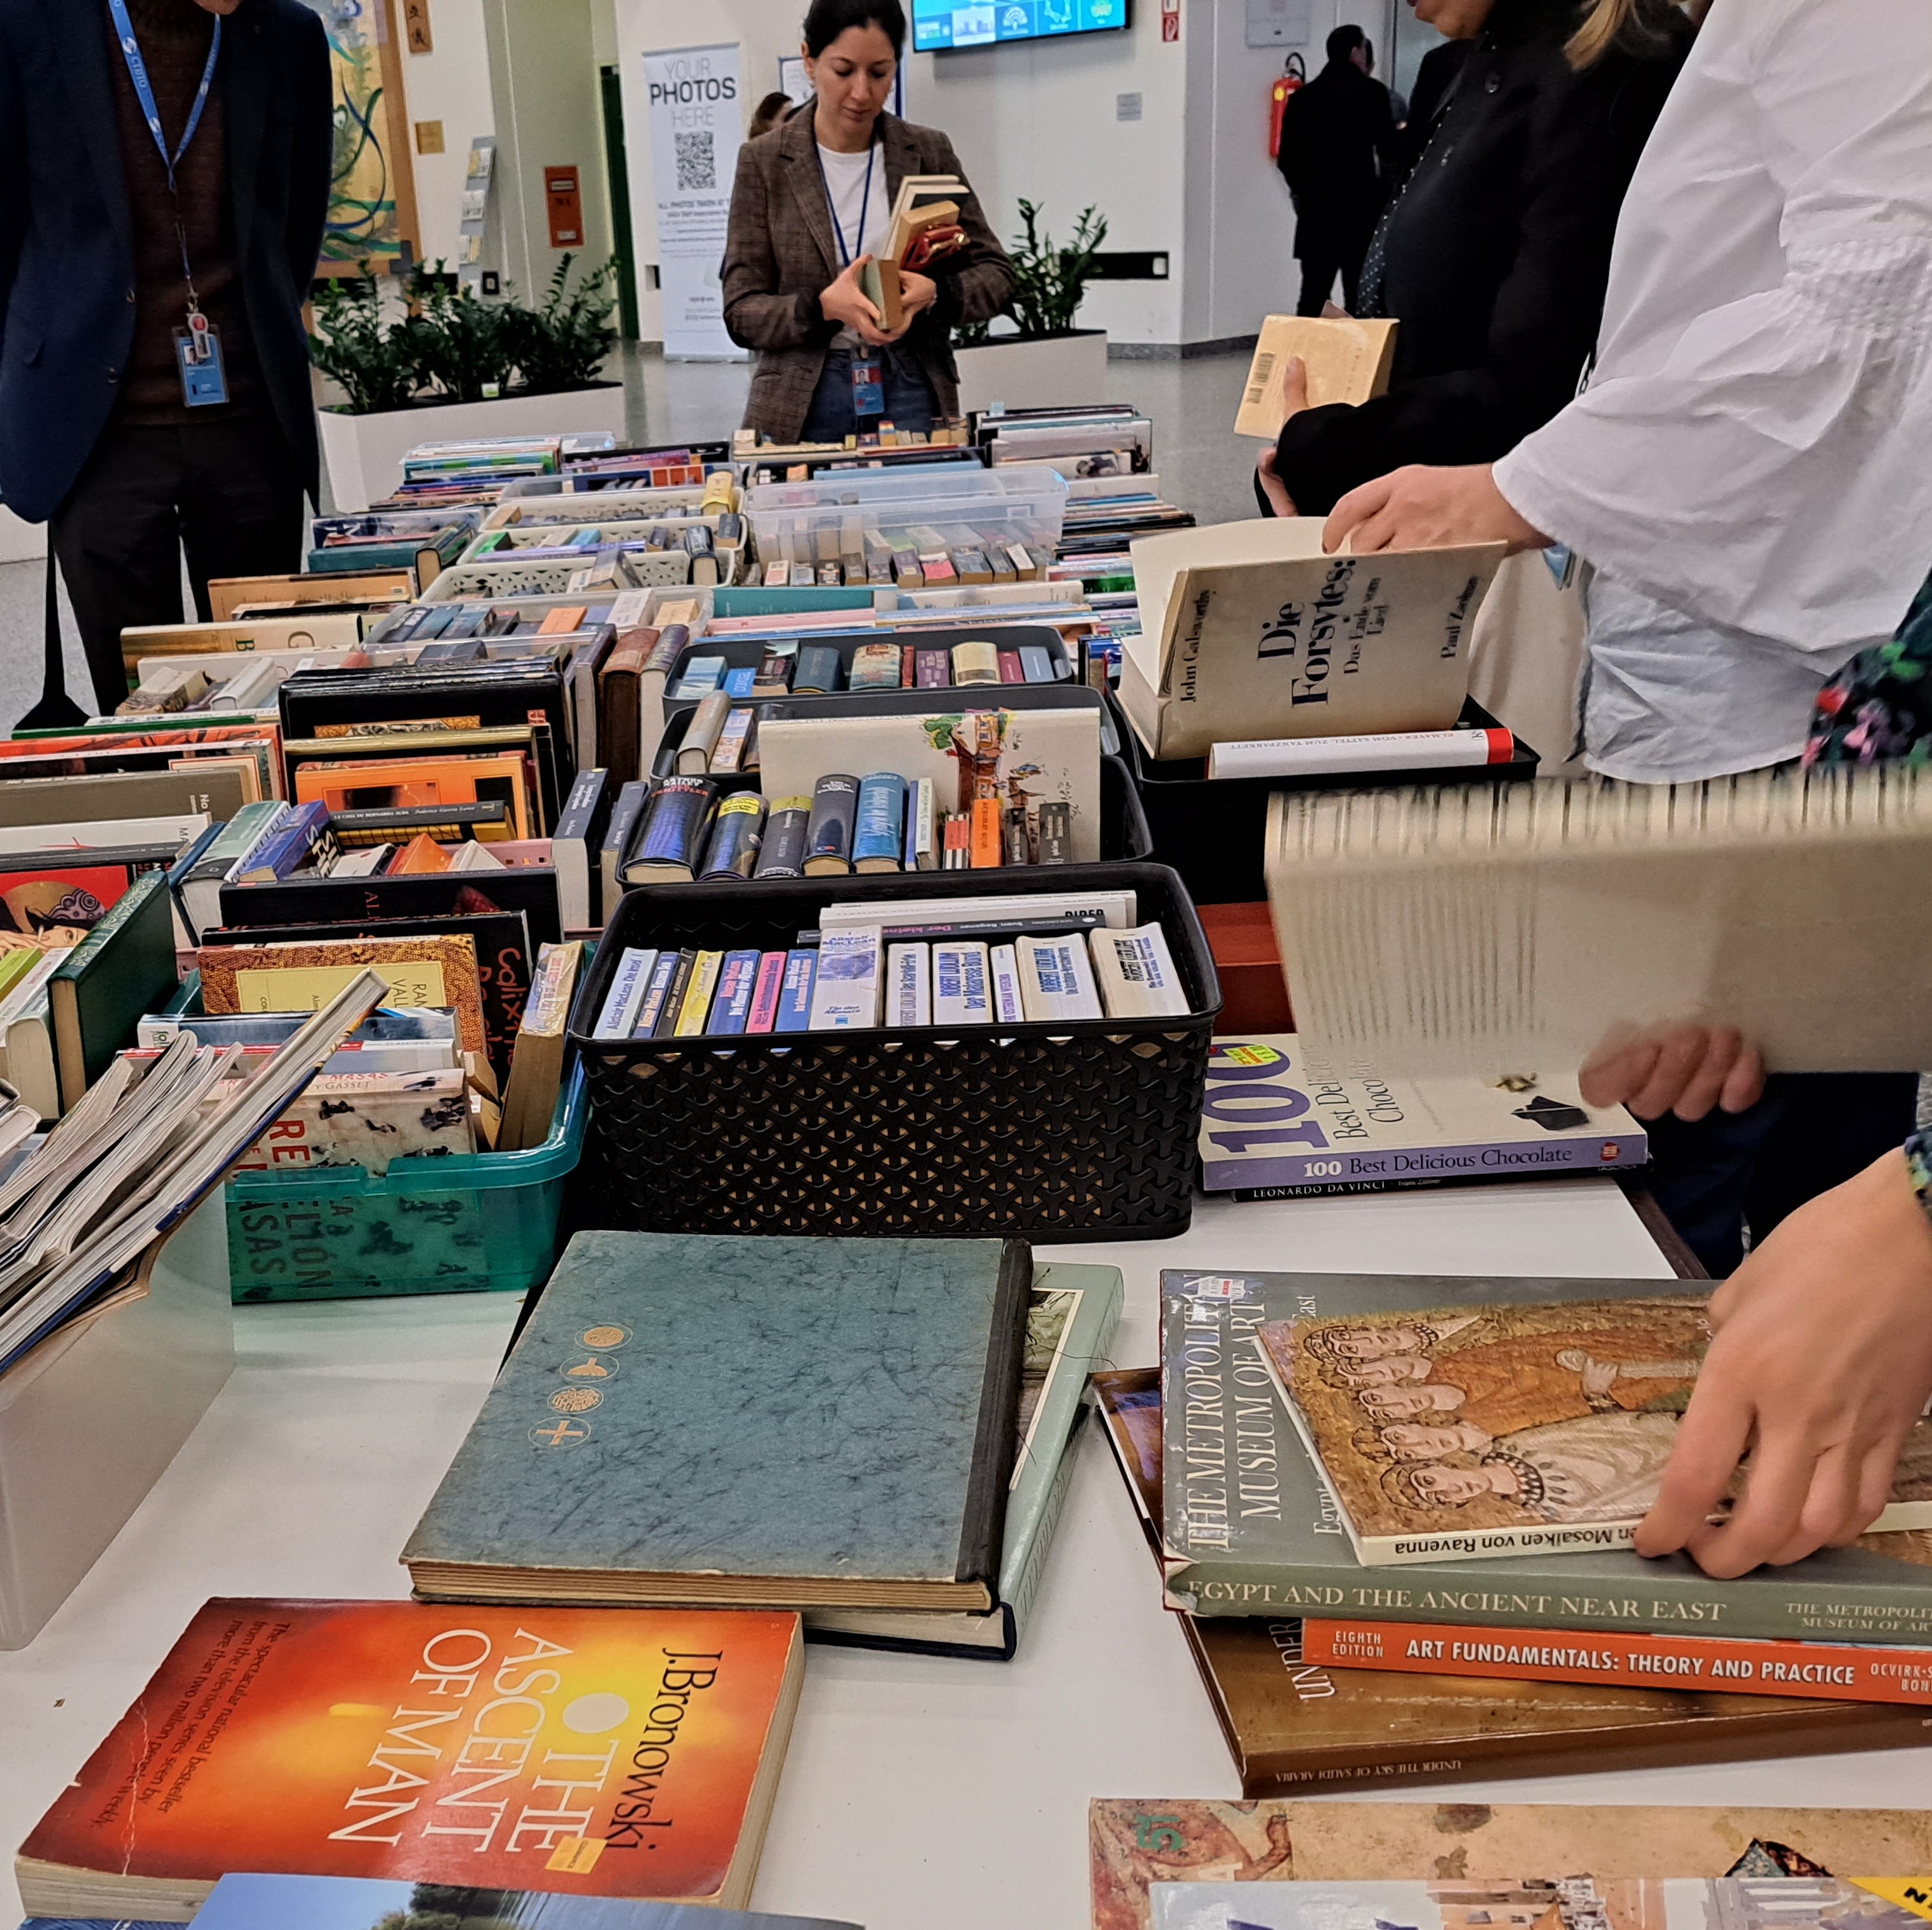 <p><span class="TextRun SCXW83062241 BCX4">The Book Shop sells donated books in many languages and genres, including children’s books. In addition, DVDs and CDs are also sold. The shop is open on Wednesday and Friday from 12:00-14:00 in room G0E76 </span><span class="TextRun SCXW83062241 BCX4">just past the VIC café.</span><span class="TextRun SCXW83062241 BCX4"> <br /></span></p>